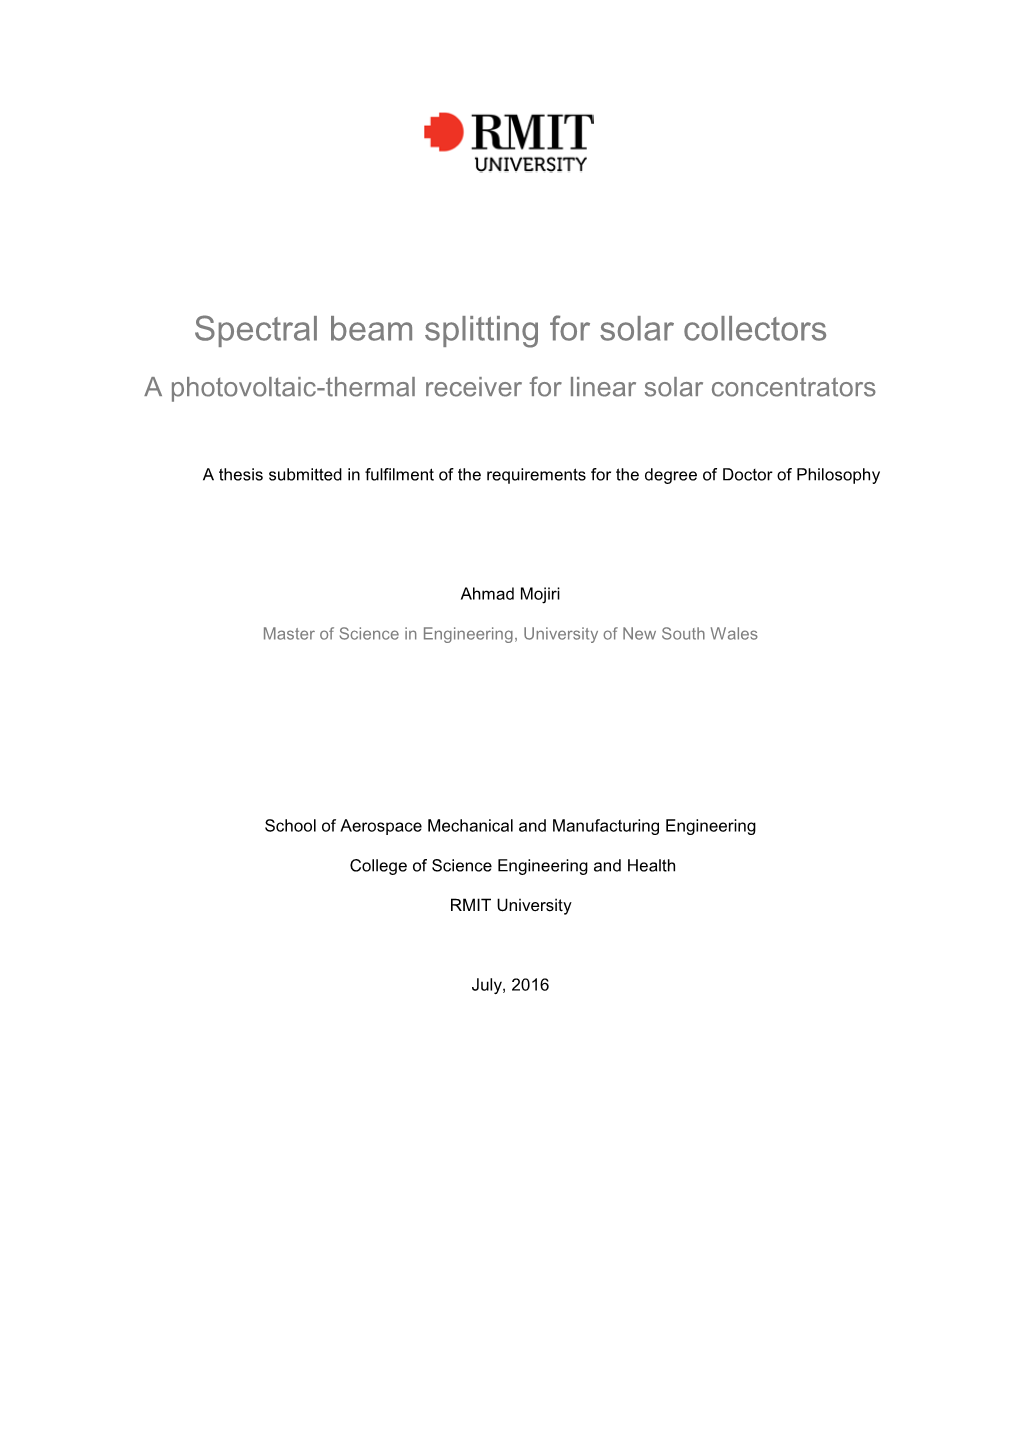 Spectral Beam Splitting for Solar Collectors a Photovoltaic-Thermal Receiver for Linear Solar Concentrators